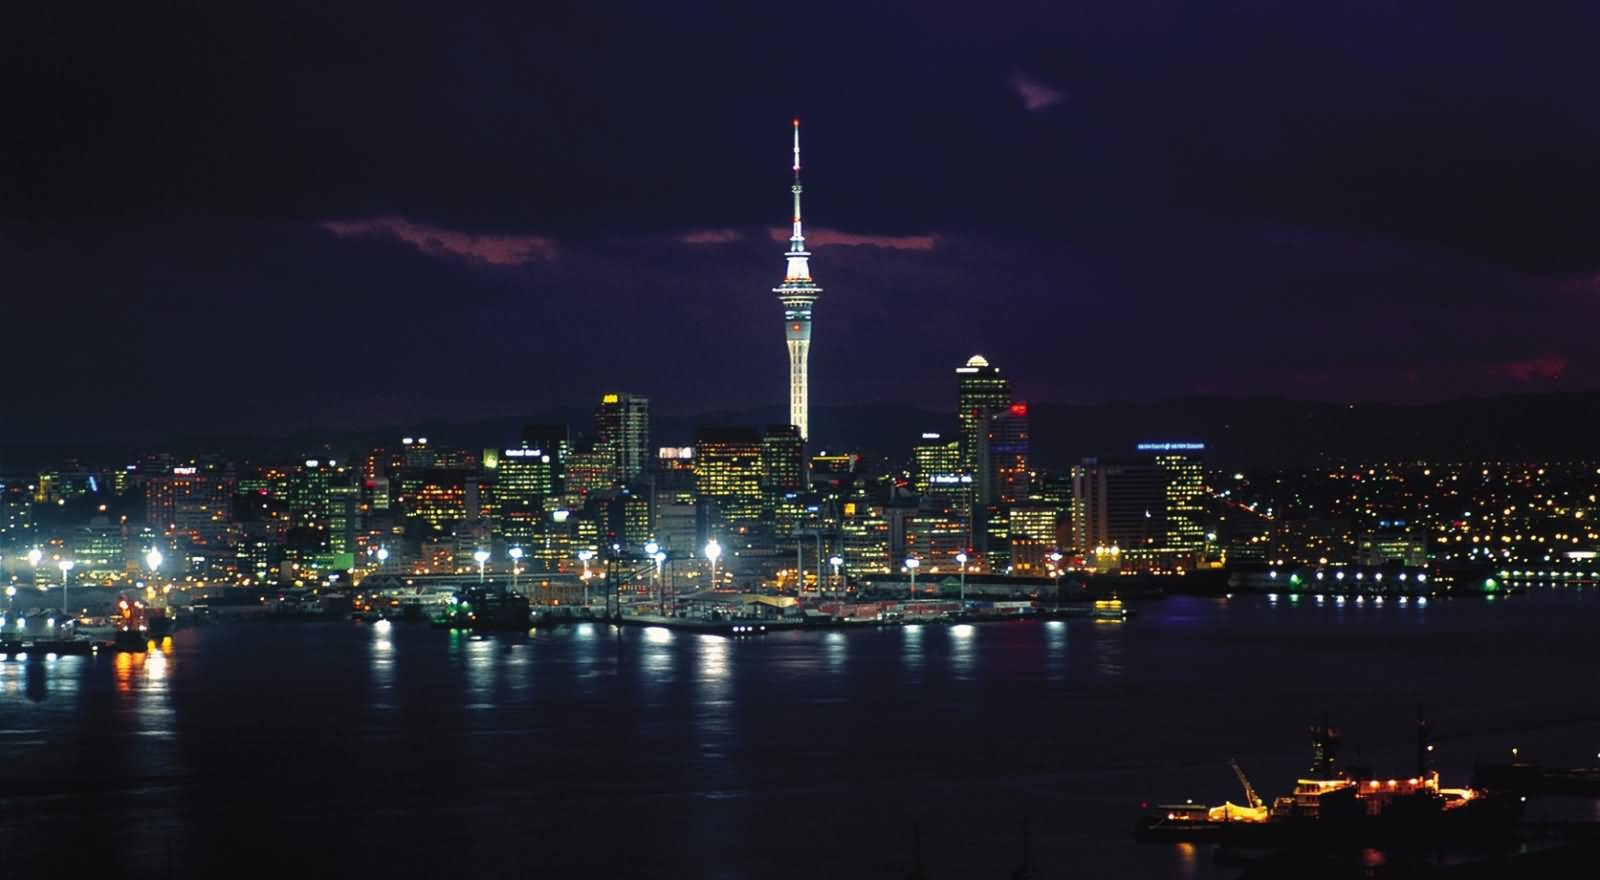 The Sky Tower In Auckland With Surrounding Buildings At Night